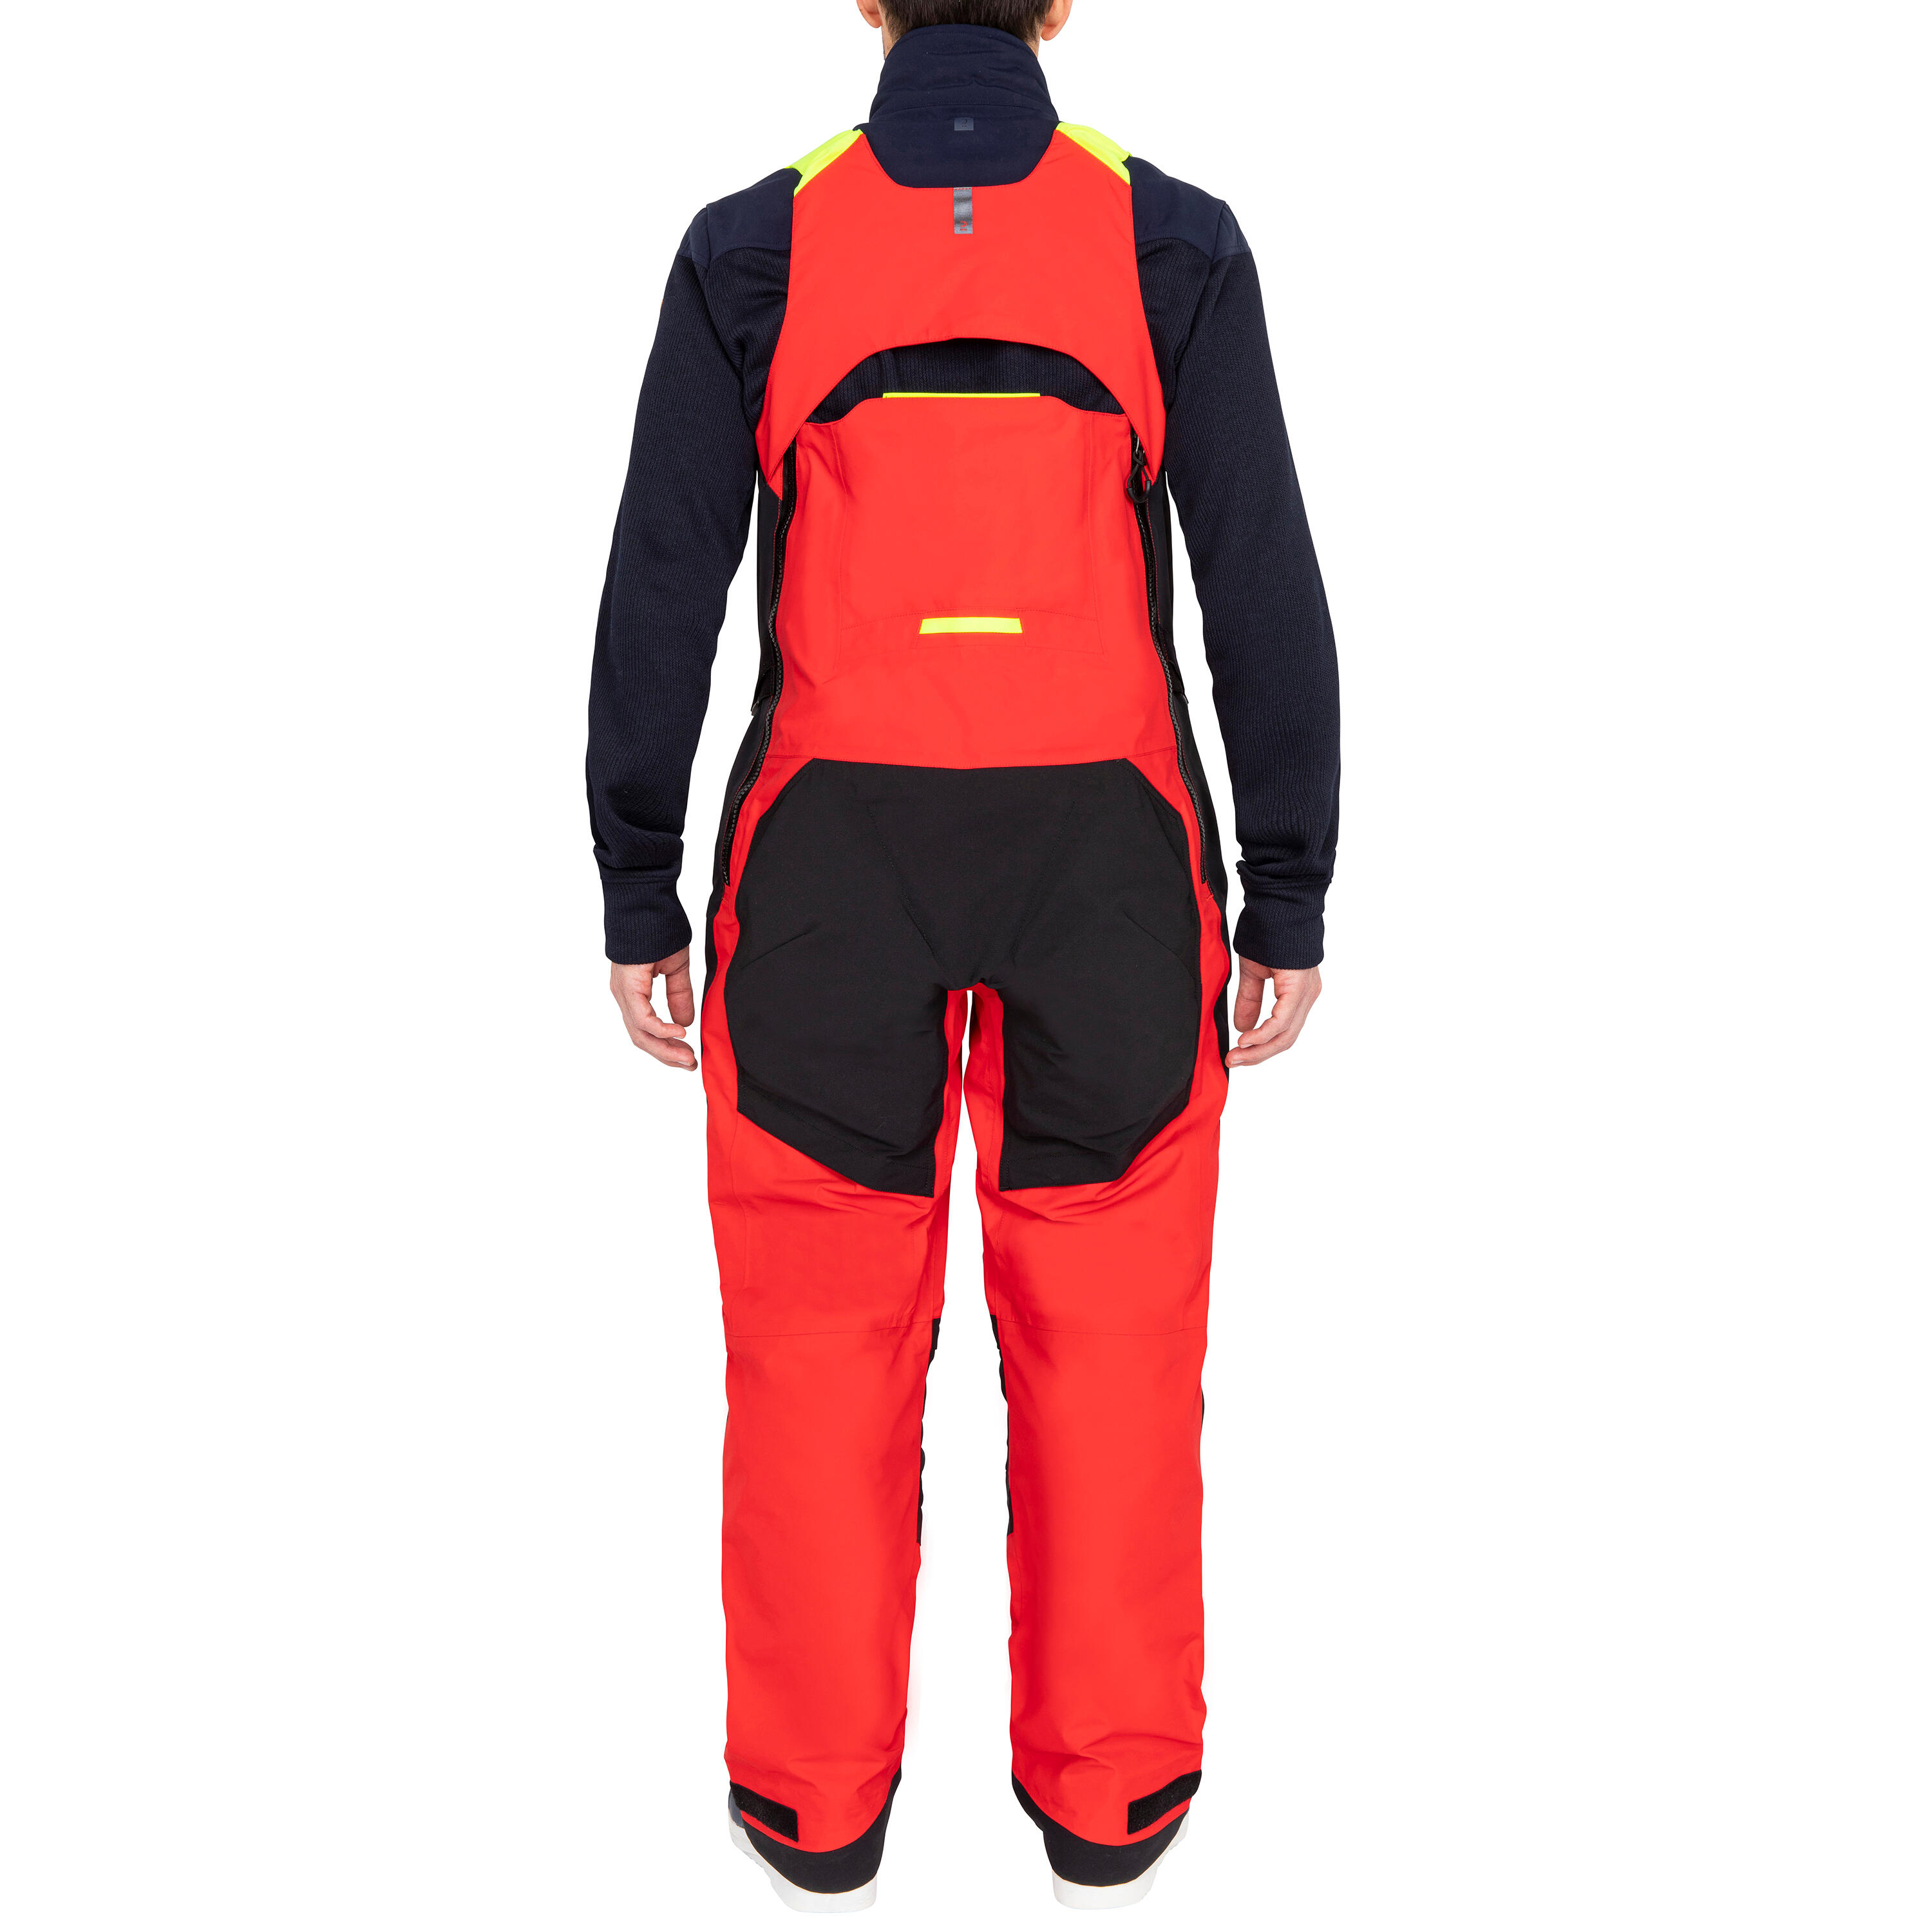 Adult Sailing overalls - Offshore 900 OPEN dropseat red 5/16